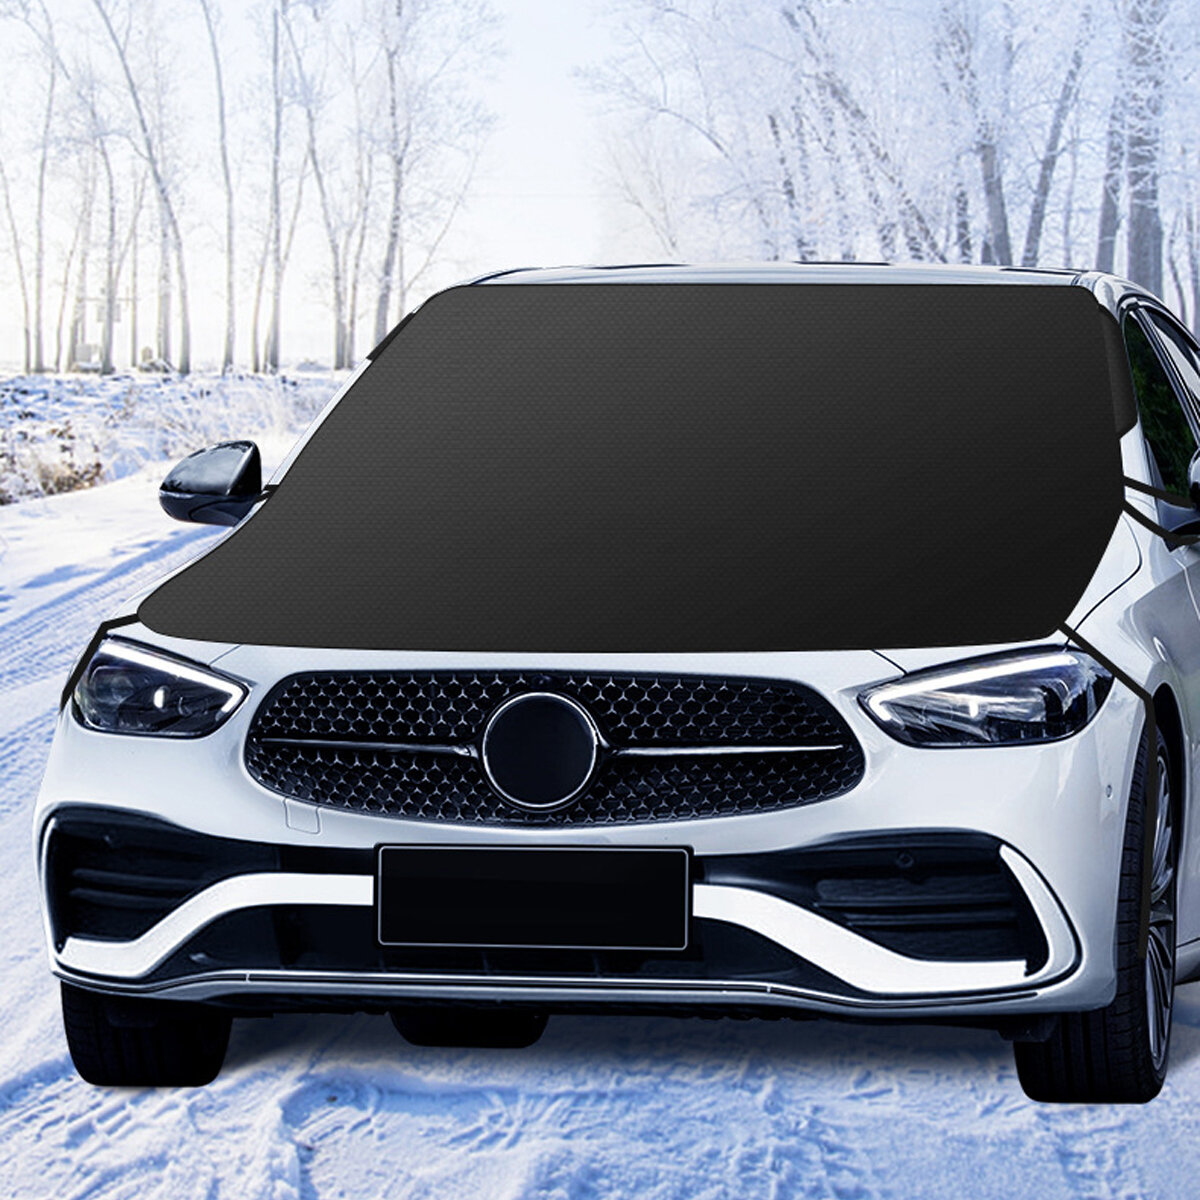 

Car Windshield Cover Sunshade Visor Frost Freeze Snow Cover Protection Snow Shield Front Windshield Cover Sun Visor Anti